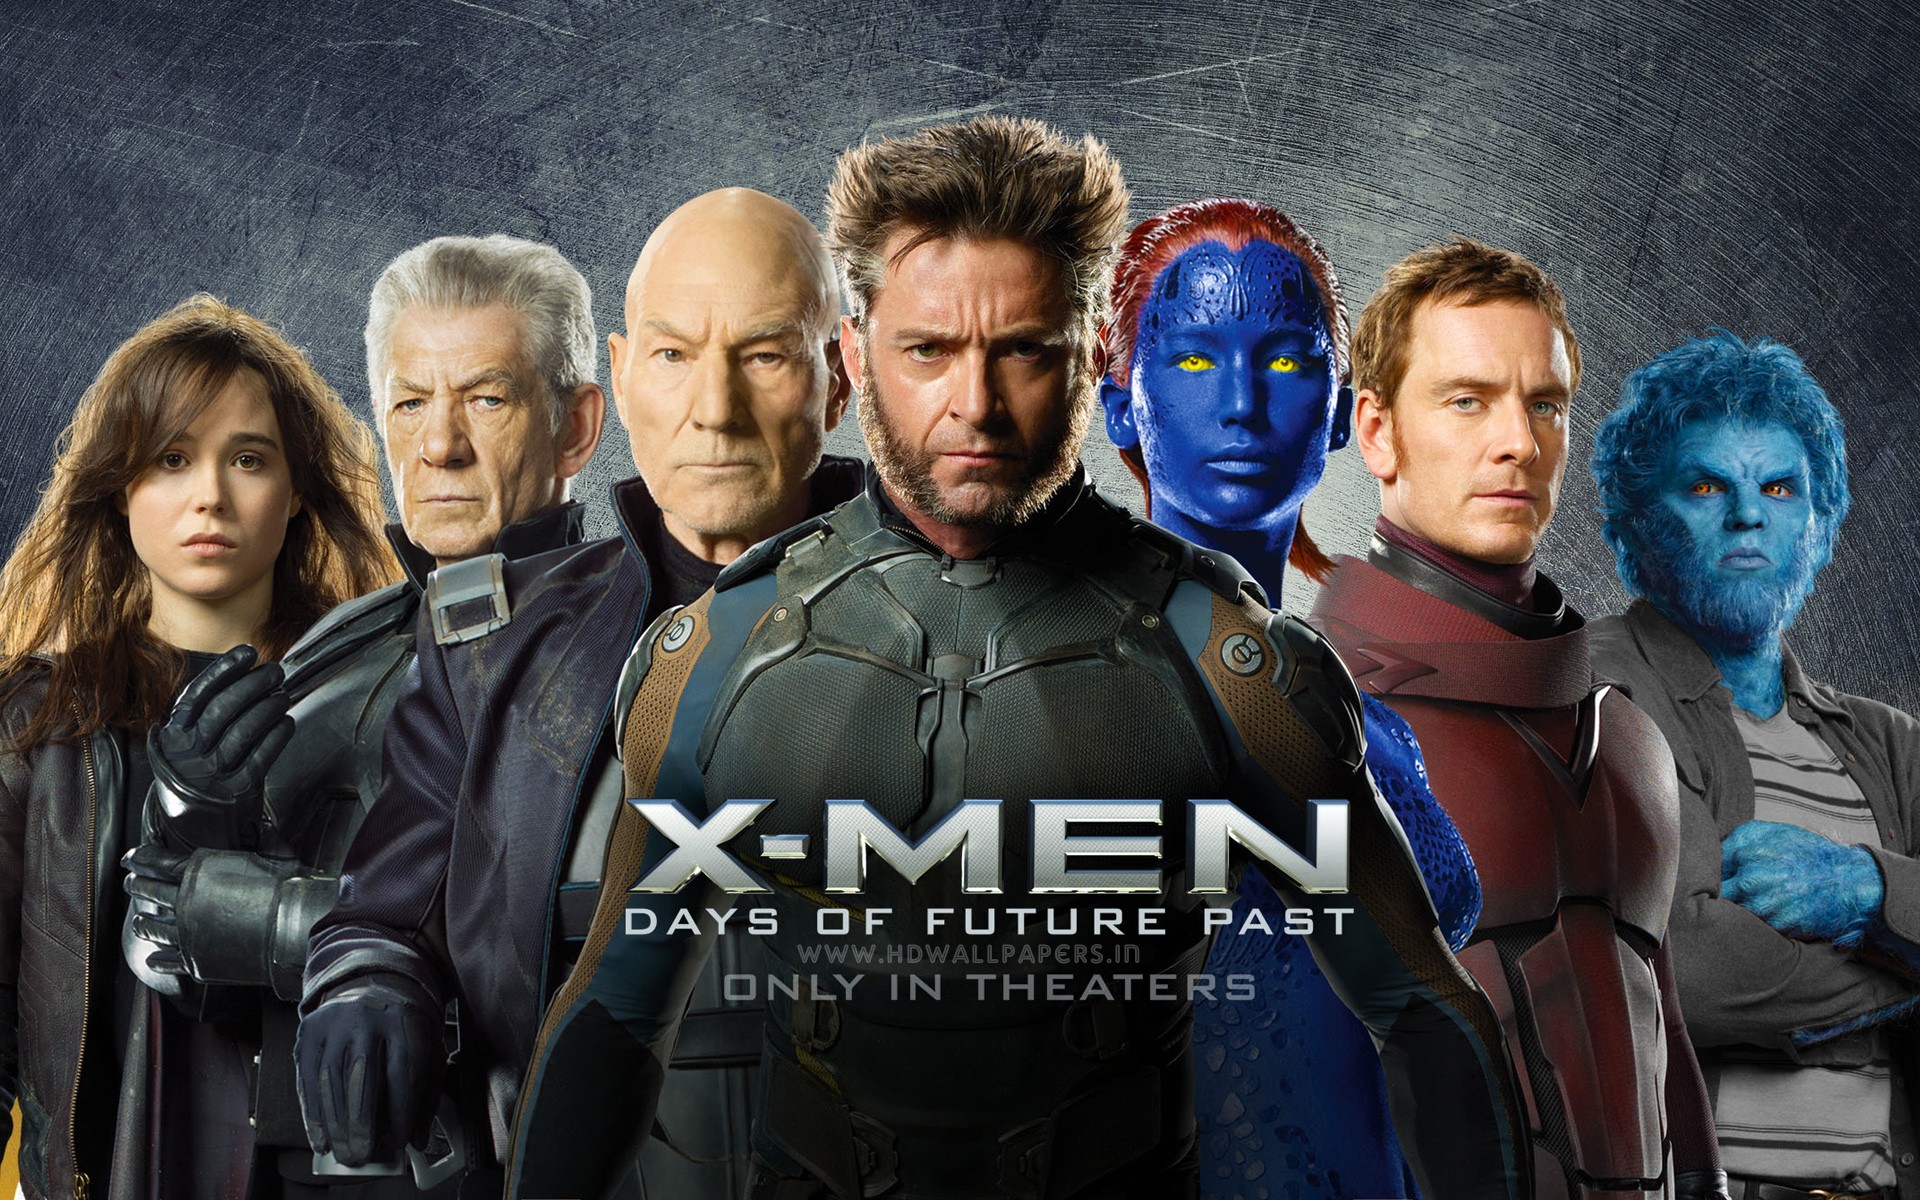 X Men Days Of Future Past Wolverine Magneto Beast Character Mystique Charles Xavier Movies Marvel Co 1920x1200